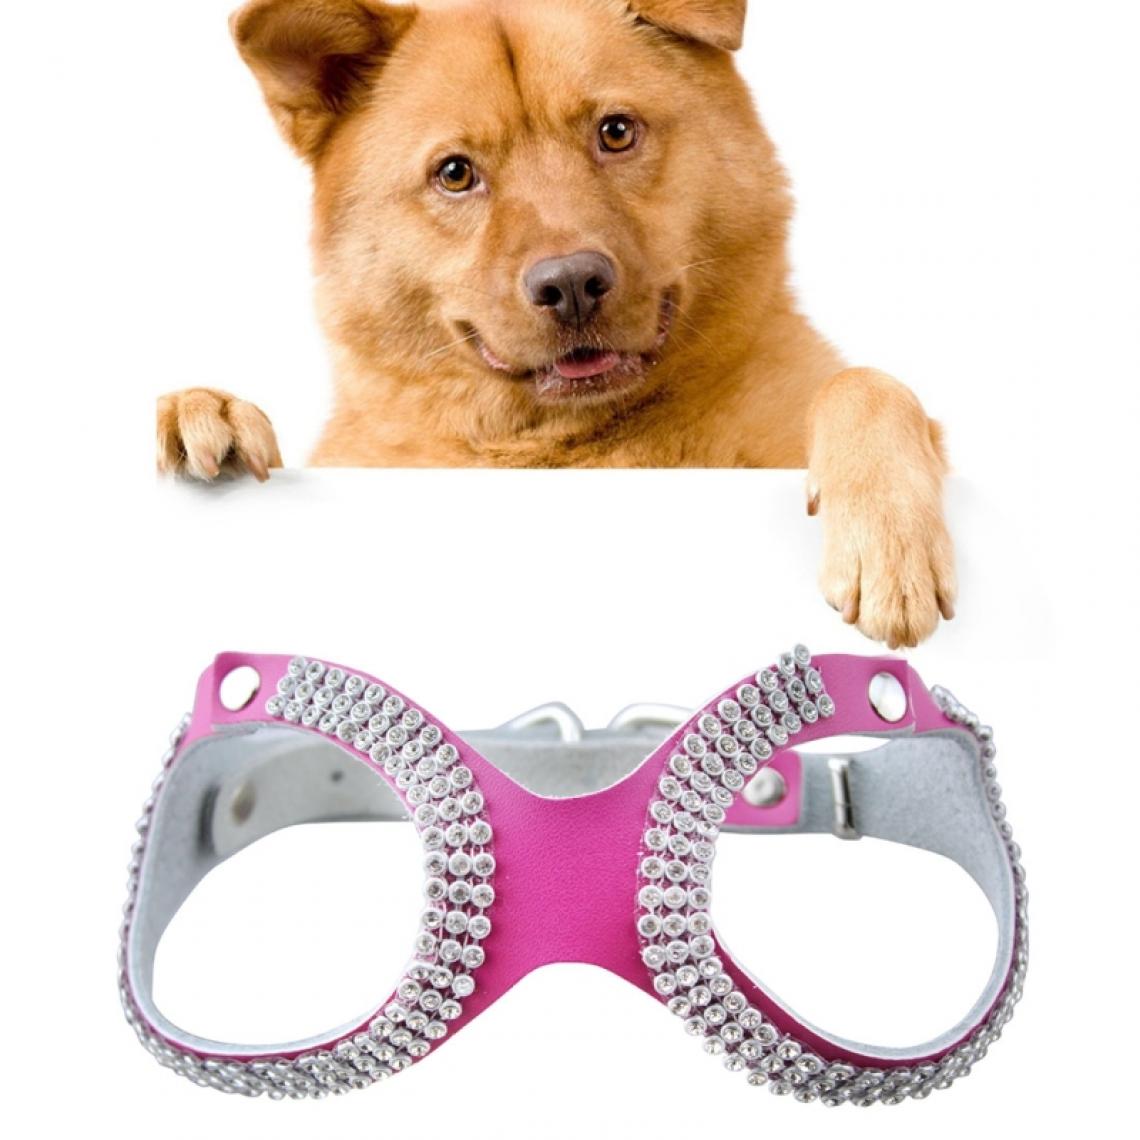 Wewoo - Collier Chien & Chat Magenta Sangle de poitrine en cuir strass Style respirant Chest, Taille: S - Collier pour chat